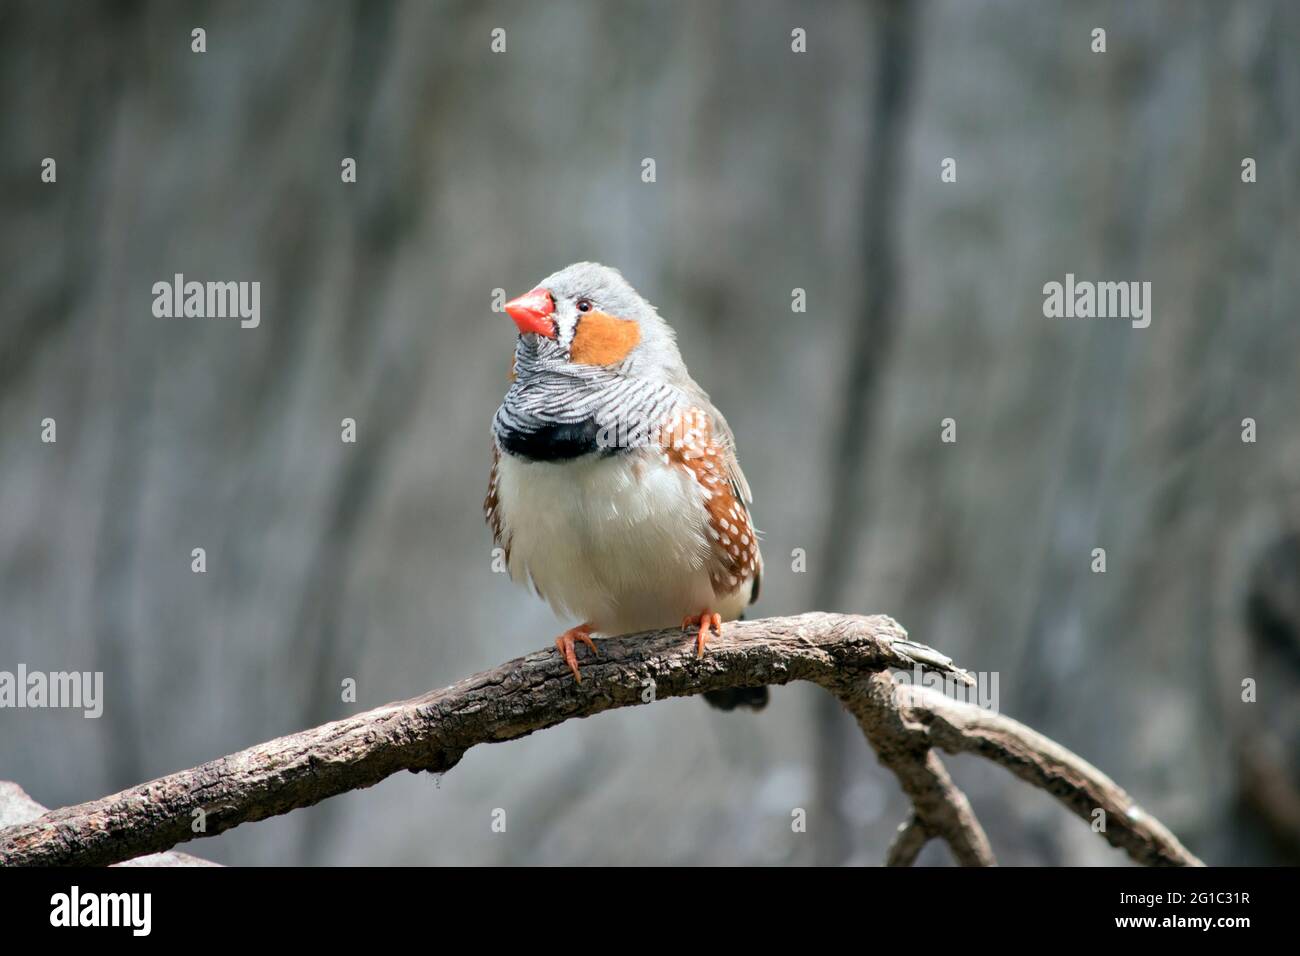 the zebra finch is a colorful bird with an orange beak, grey feather, with brown and white spots and an orange cheek Stock Photo